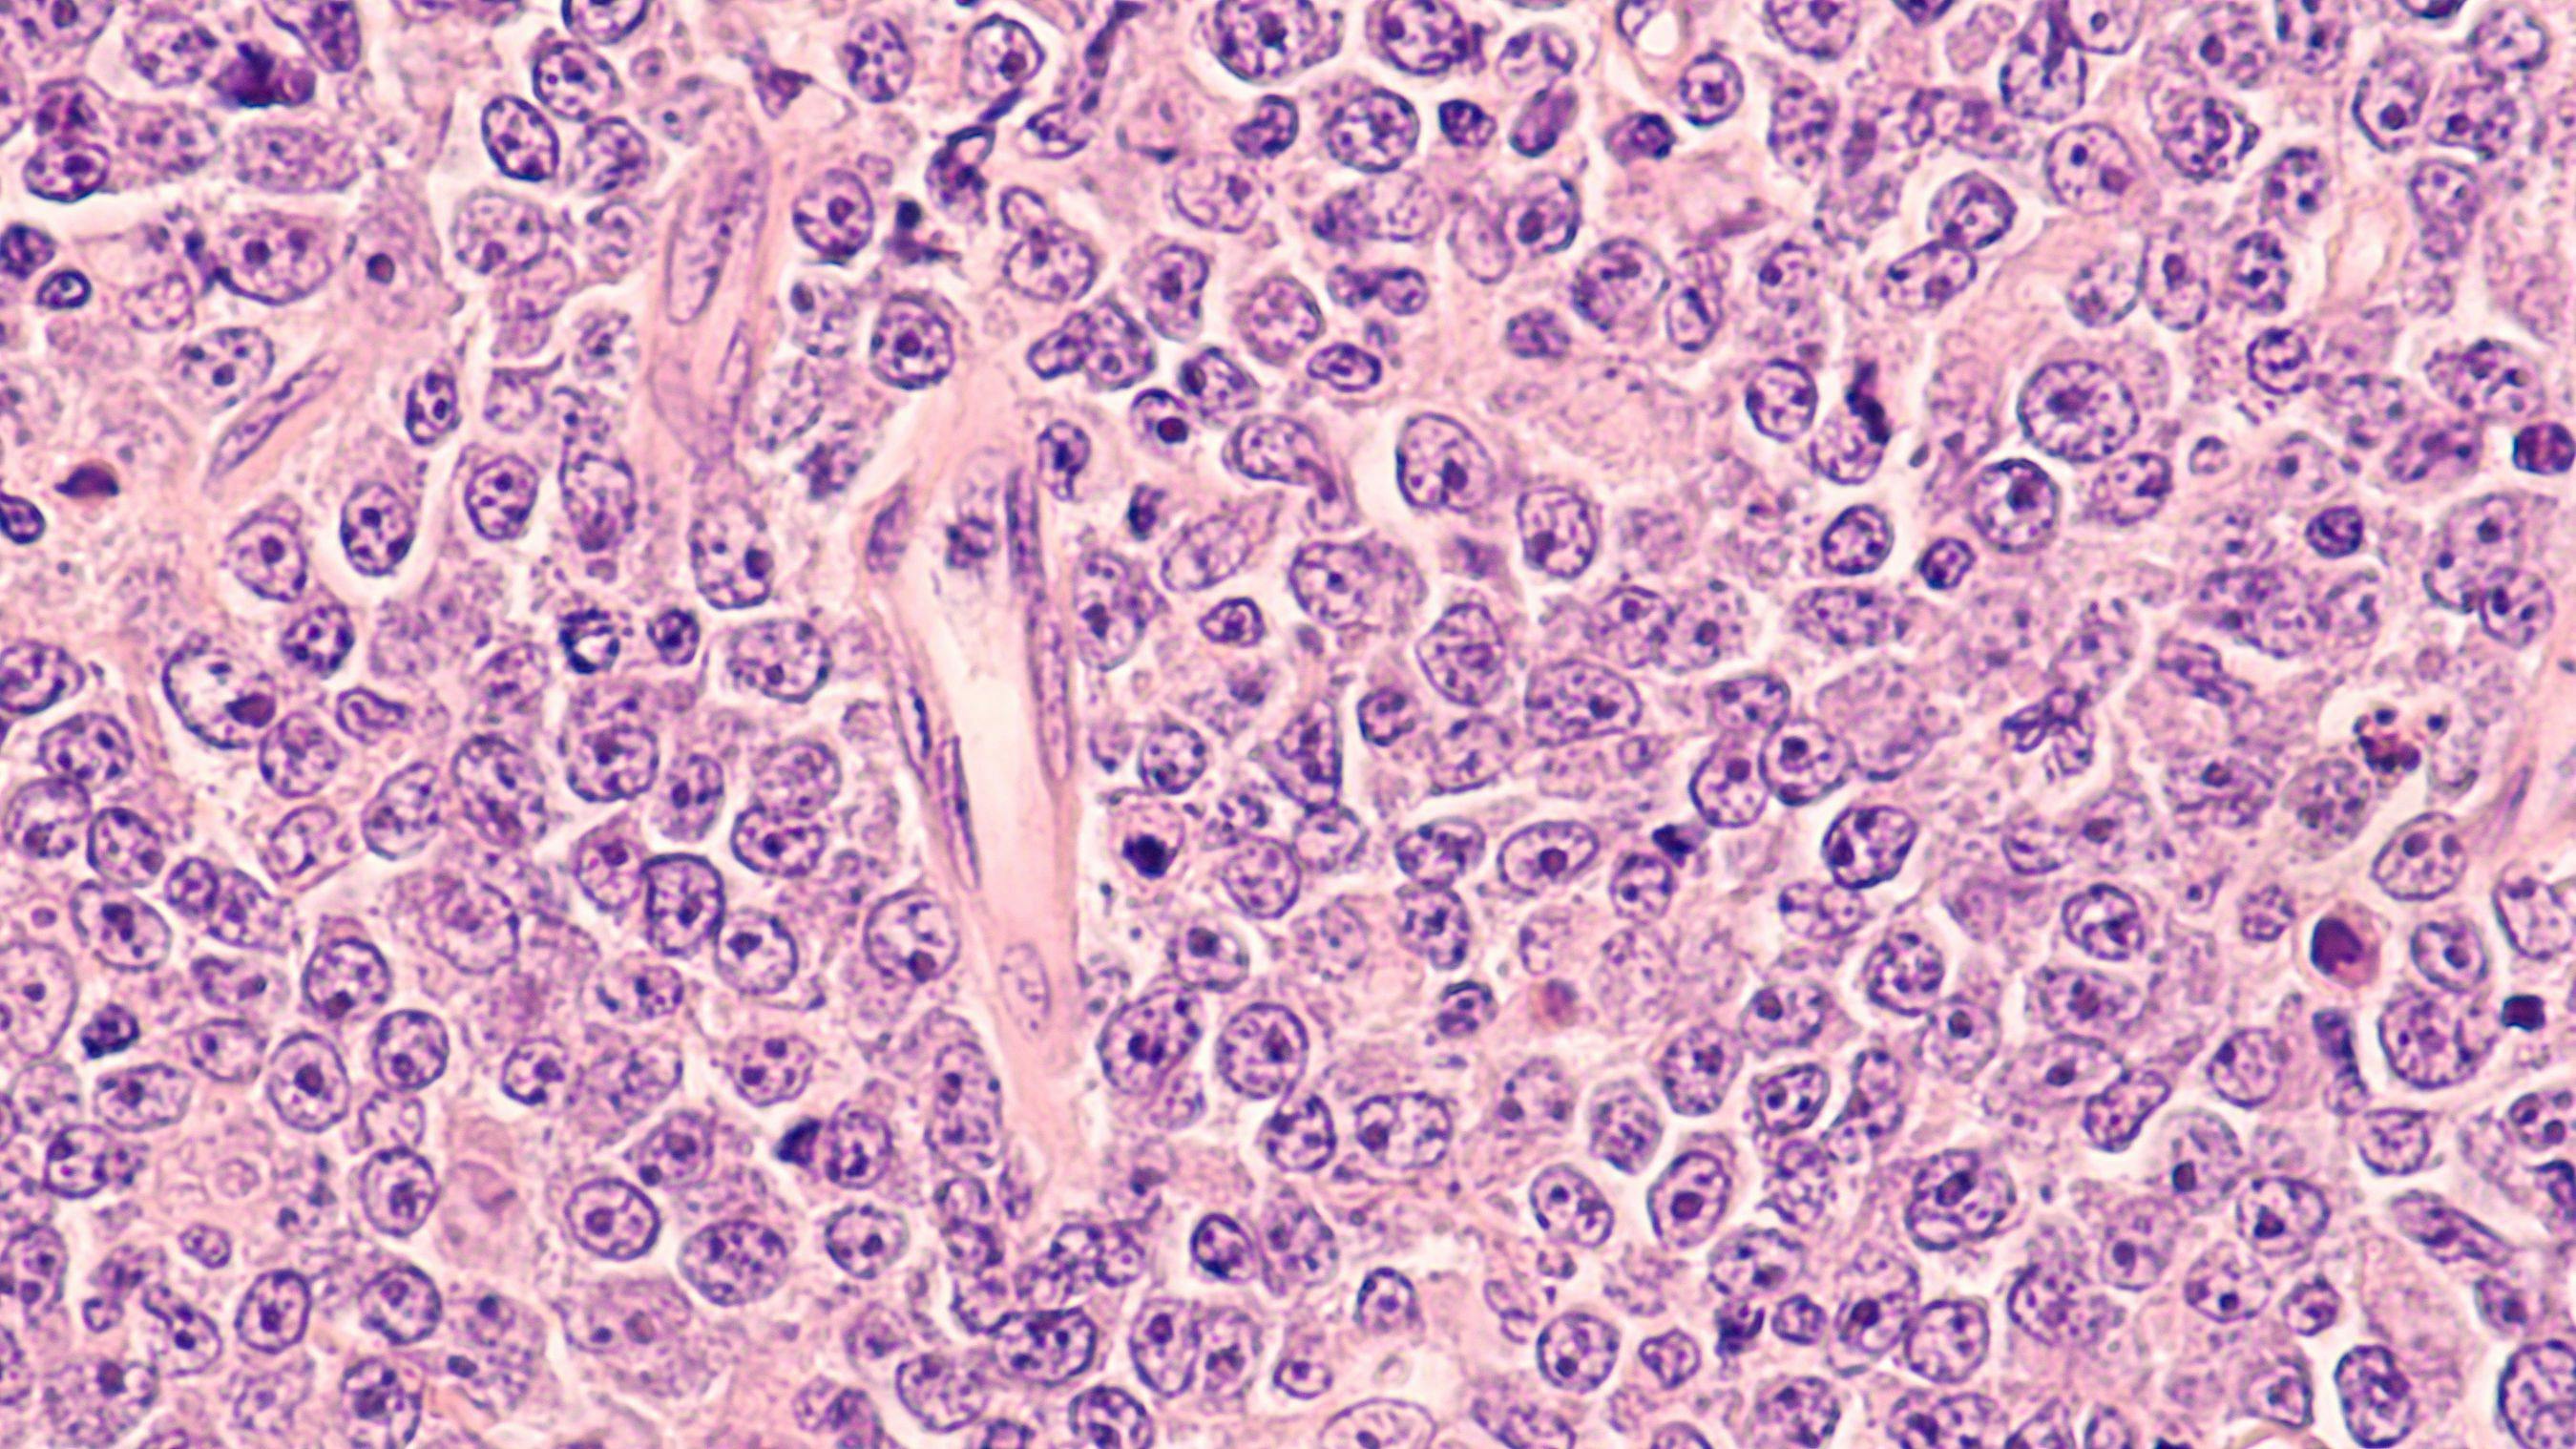 Lymphoma awareness: photomicrograph of a diffuse large B-cell lymphoma (DLBCL) a type of non-Hodgkin lymphoma. This case is from the testis of an elderly man and shows prominent nucleoli. Credit: David A Litman - stock.adobe.com.